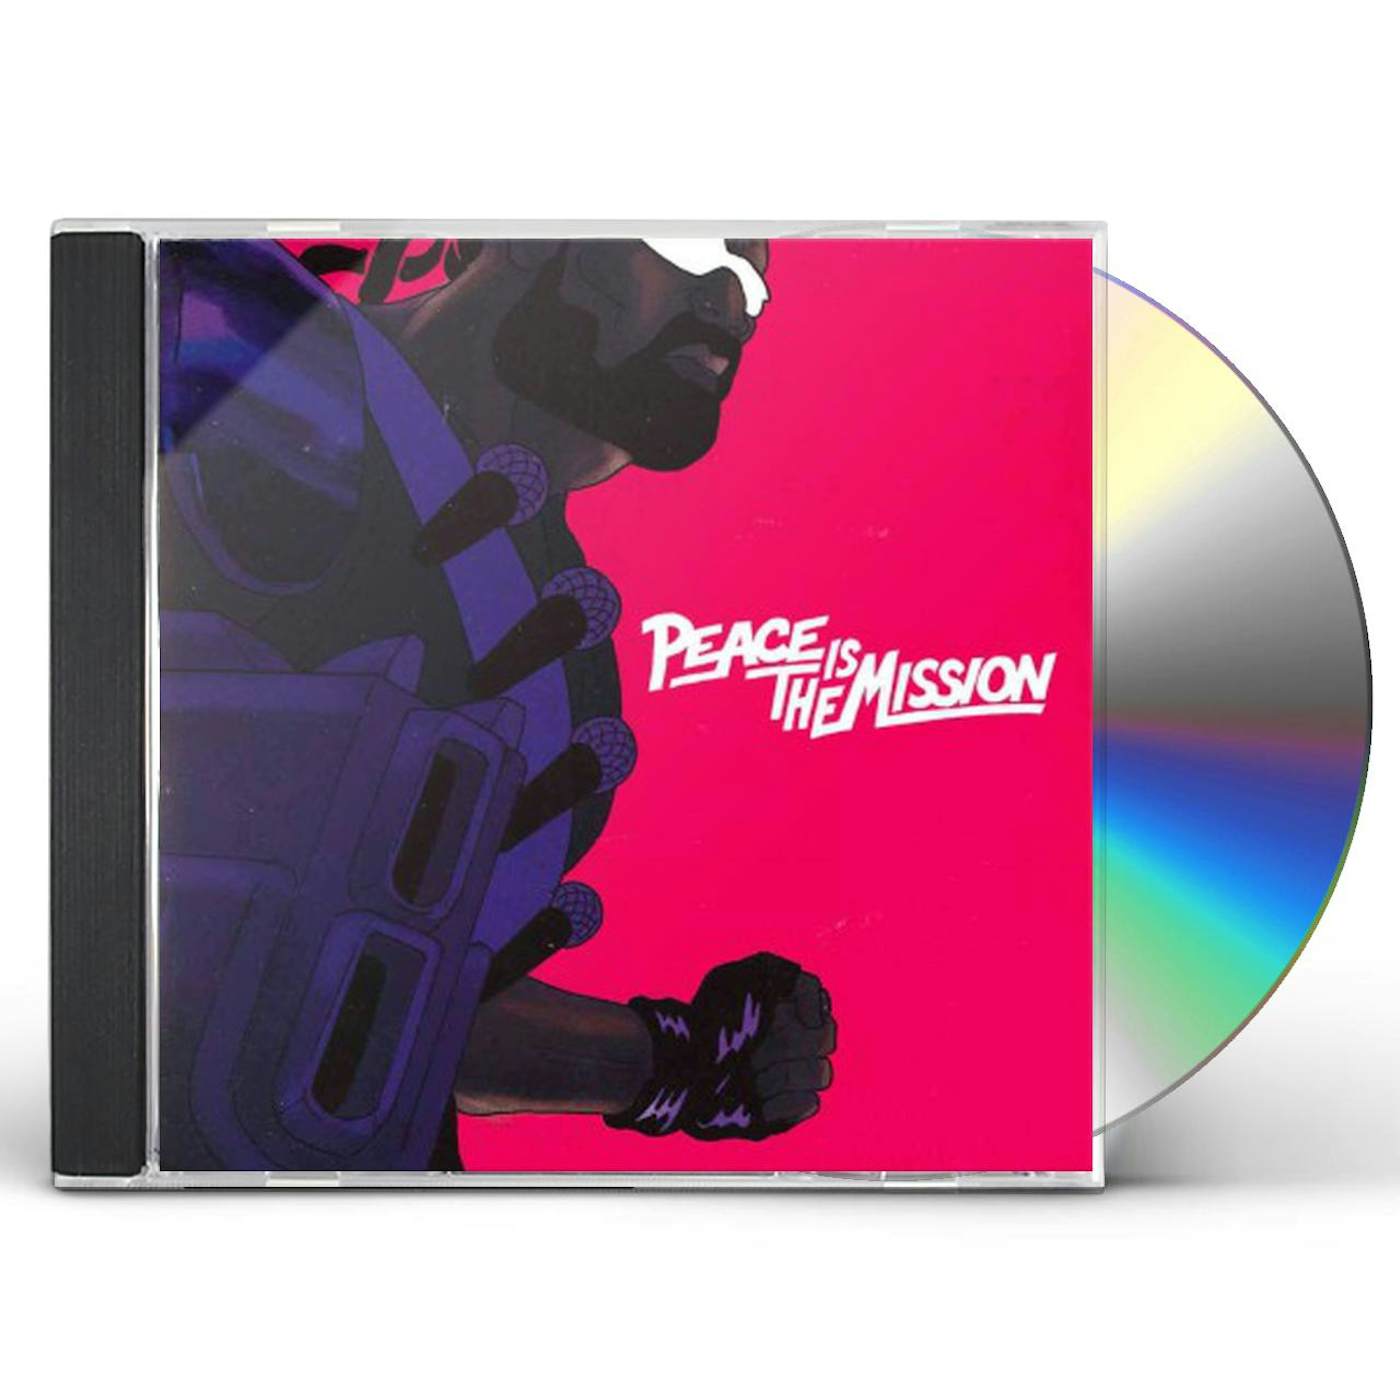 Major Lazer PEACE IS THE MISSION CD